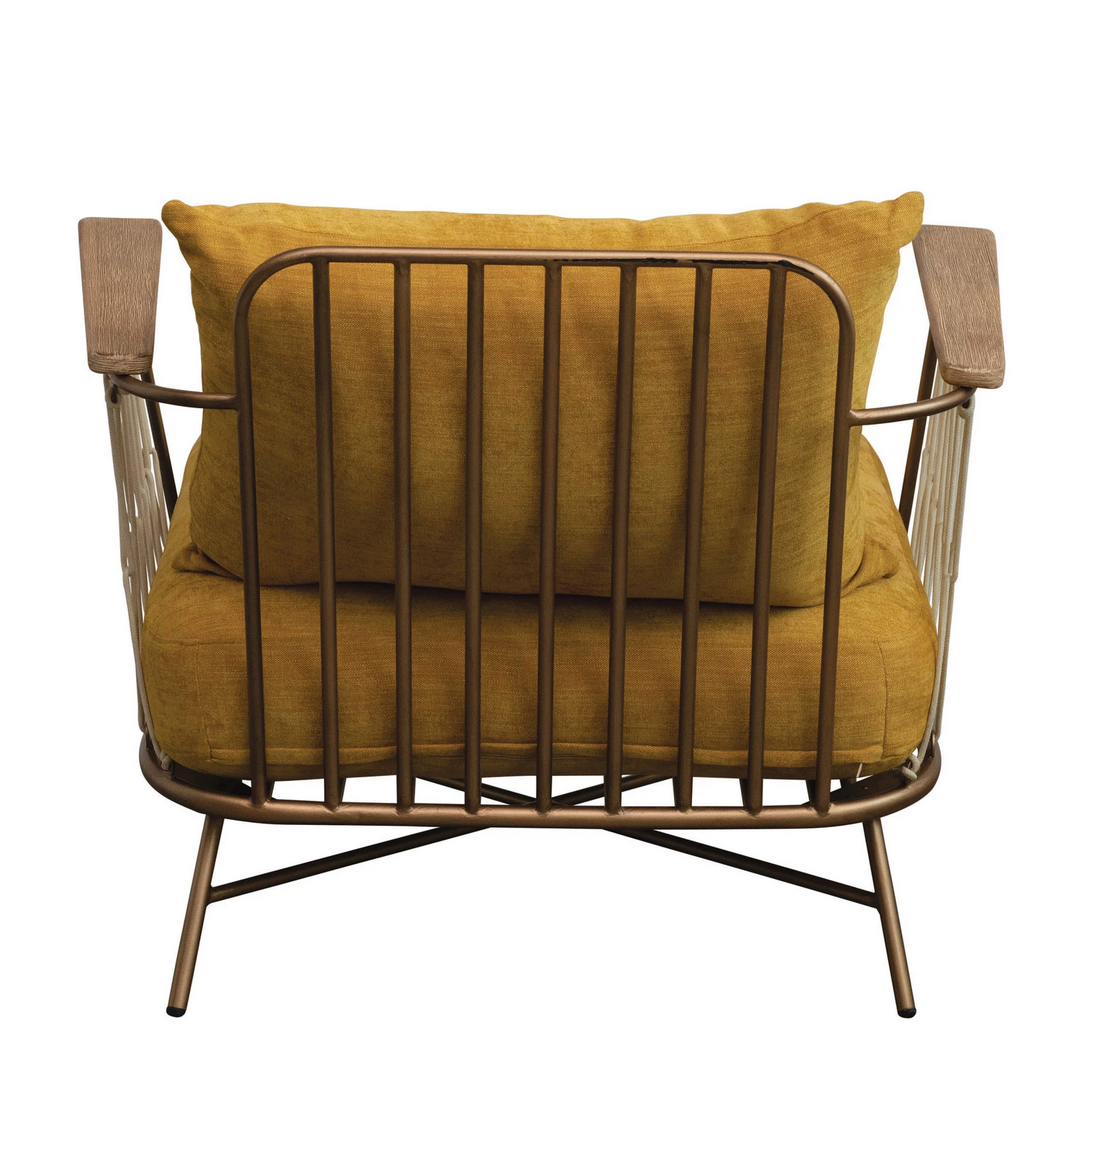 Metal and Woven Nylon Rope Chair with Cushions